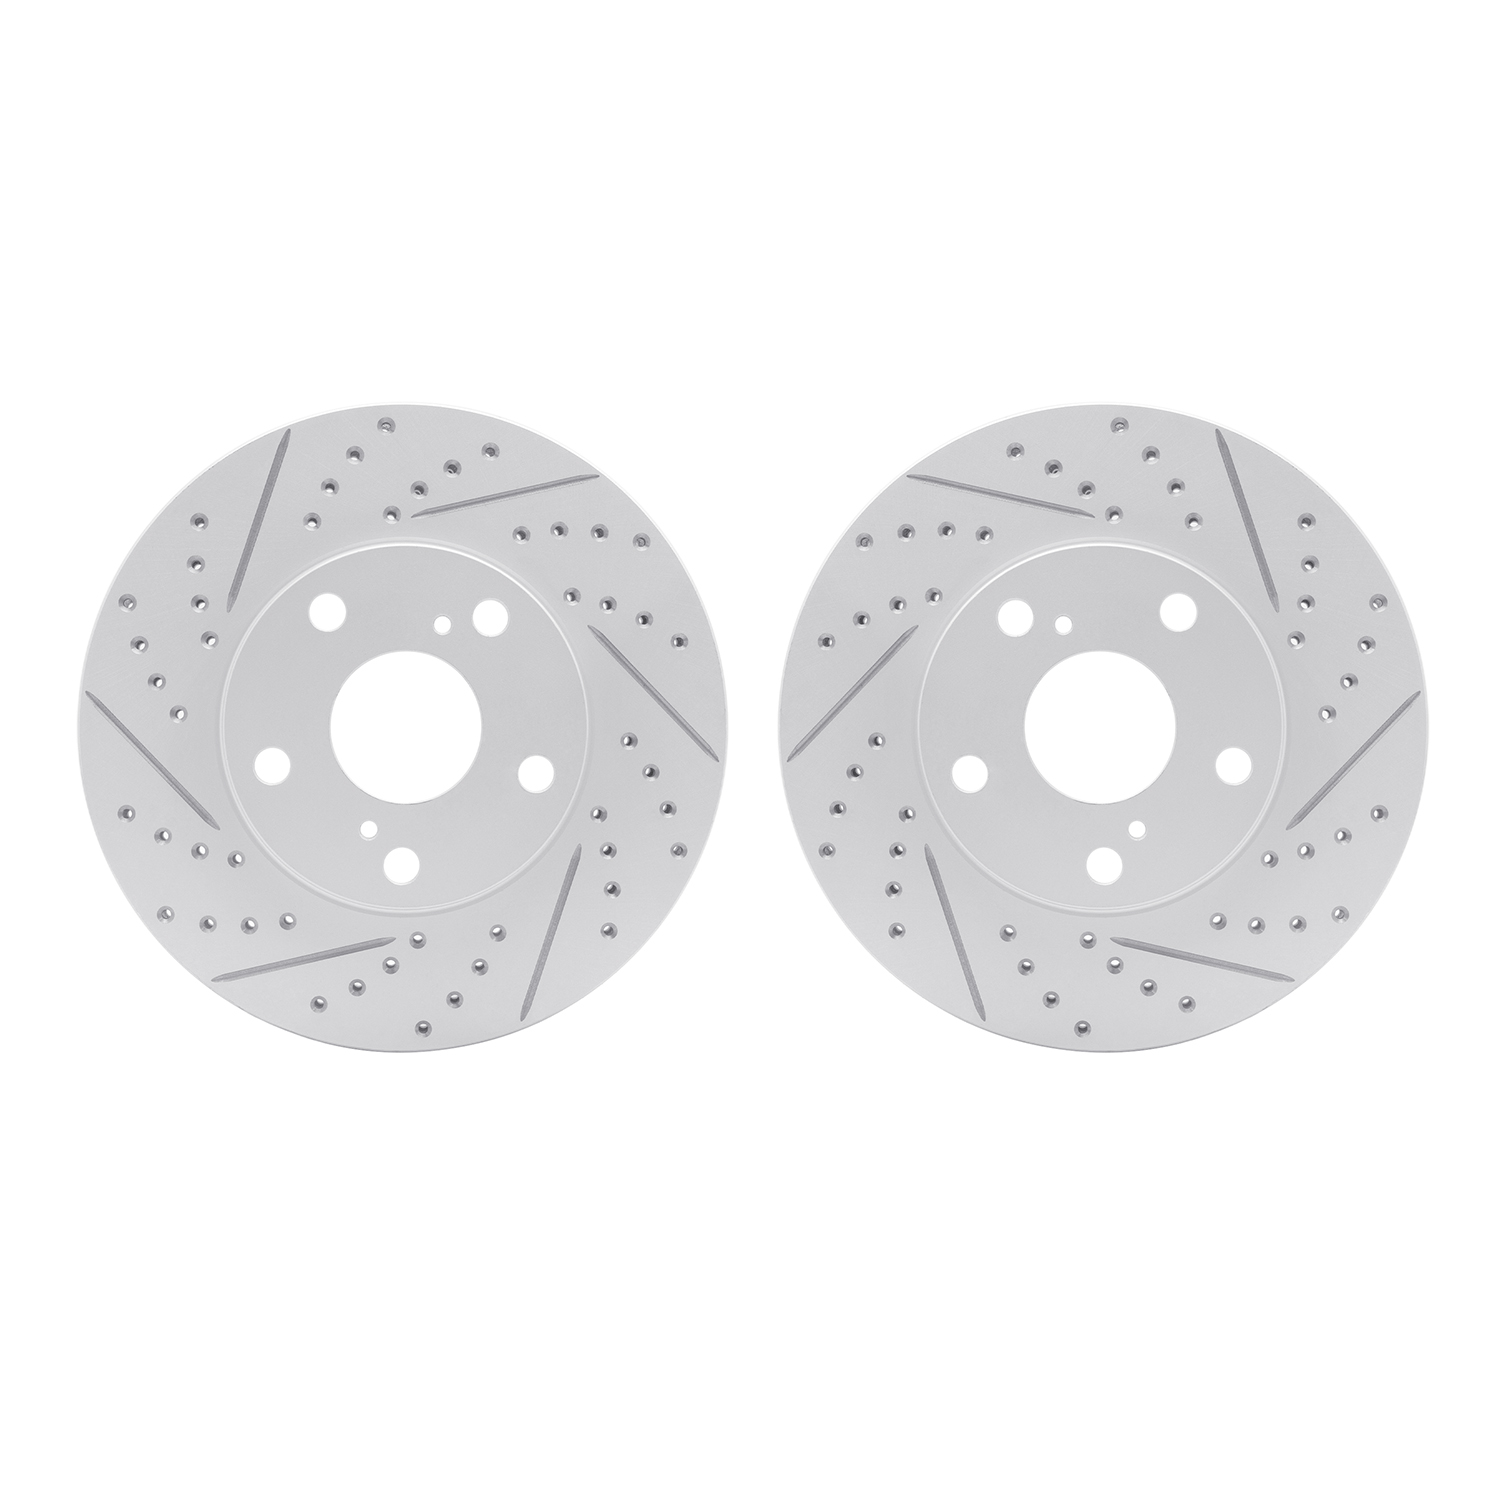 2002-76002 Geoperformance Drilled/Slotted Brake Rotors, 1992-2006 Lexus/Toyota/Scion, Position: Front